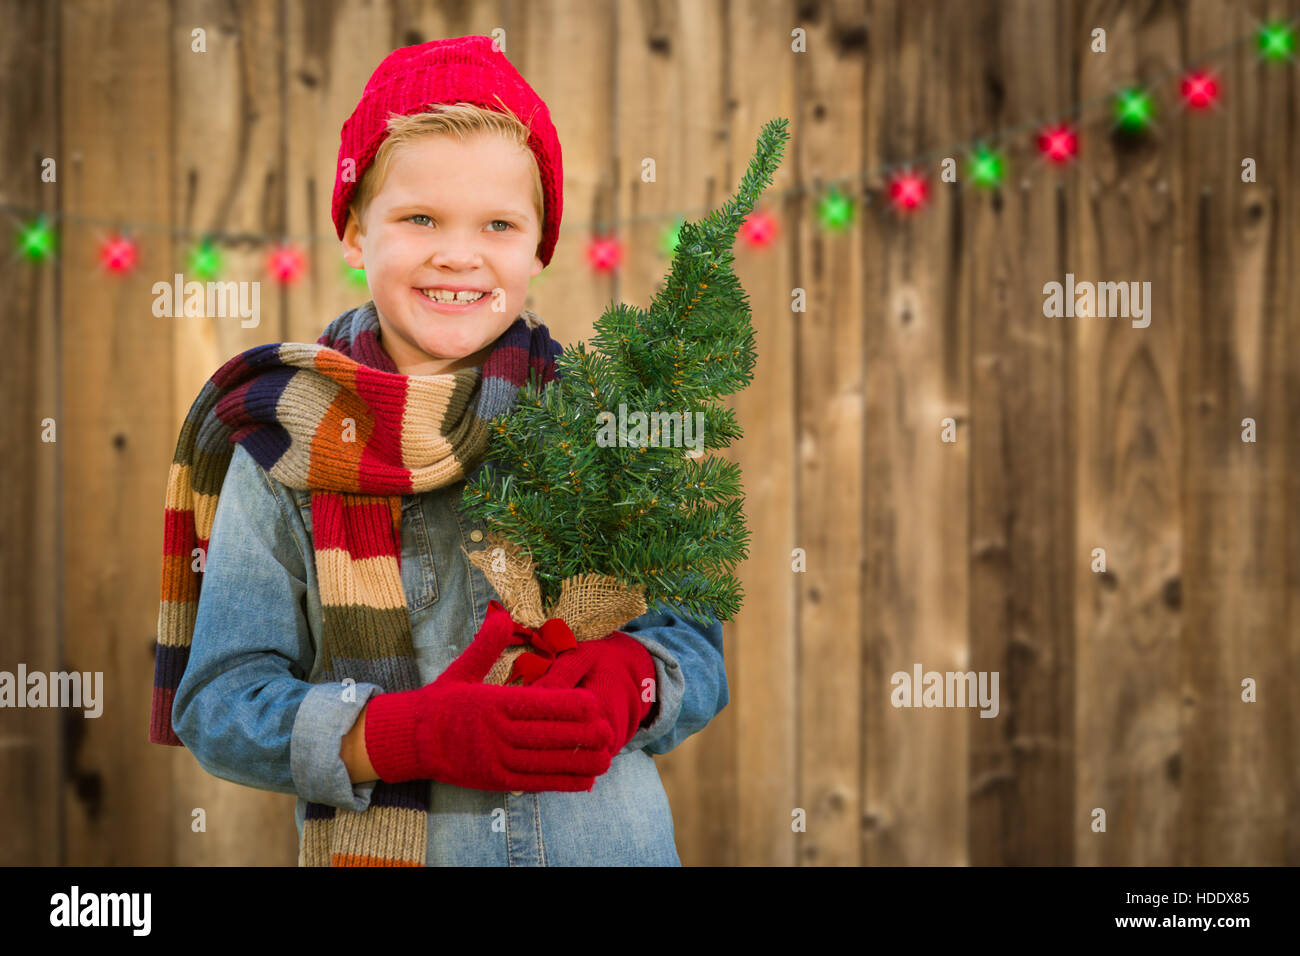 Happy Young Boy Wearing Scarf and Mittens Holding Christmas Tree On A Wood Fence Background. Stock Photo